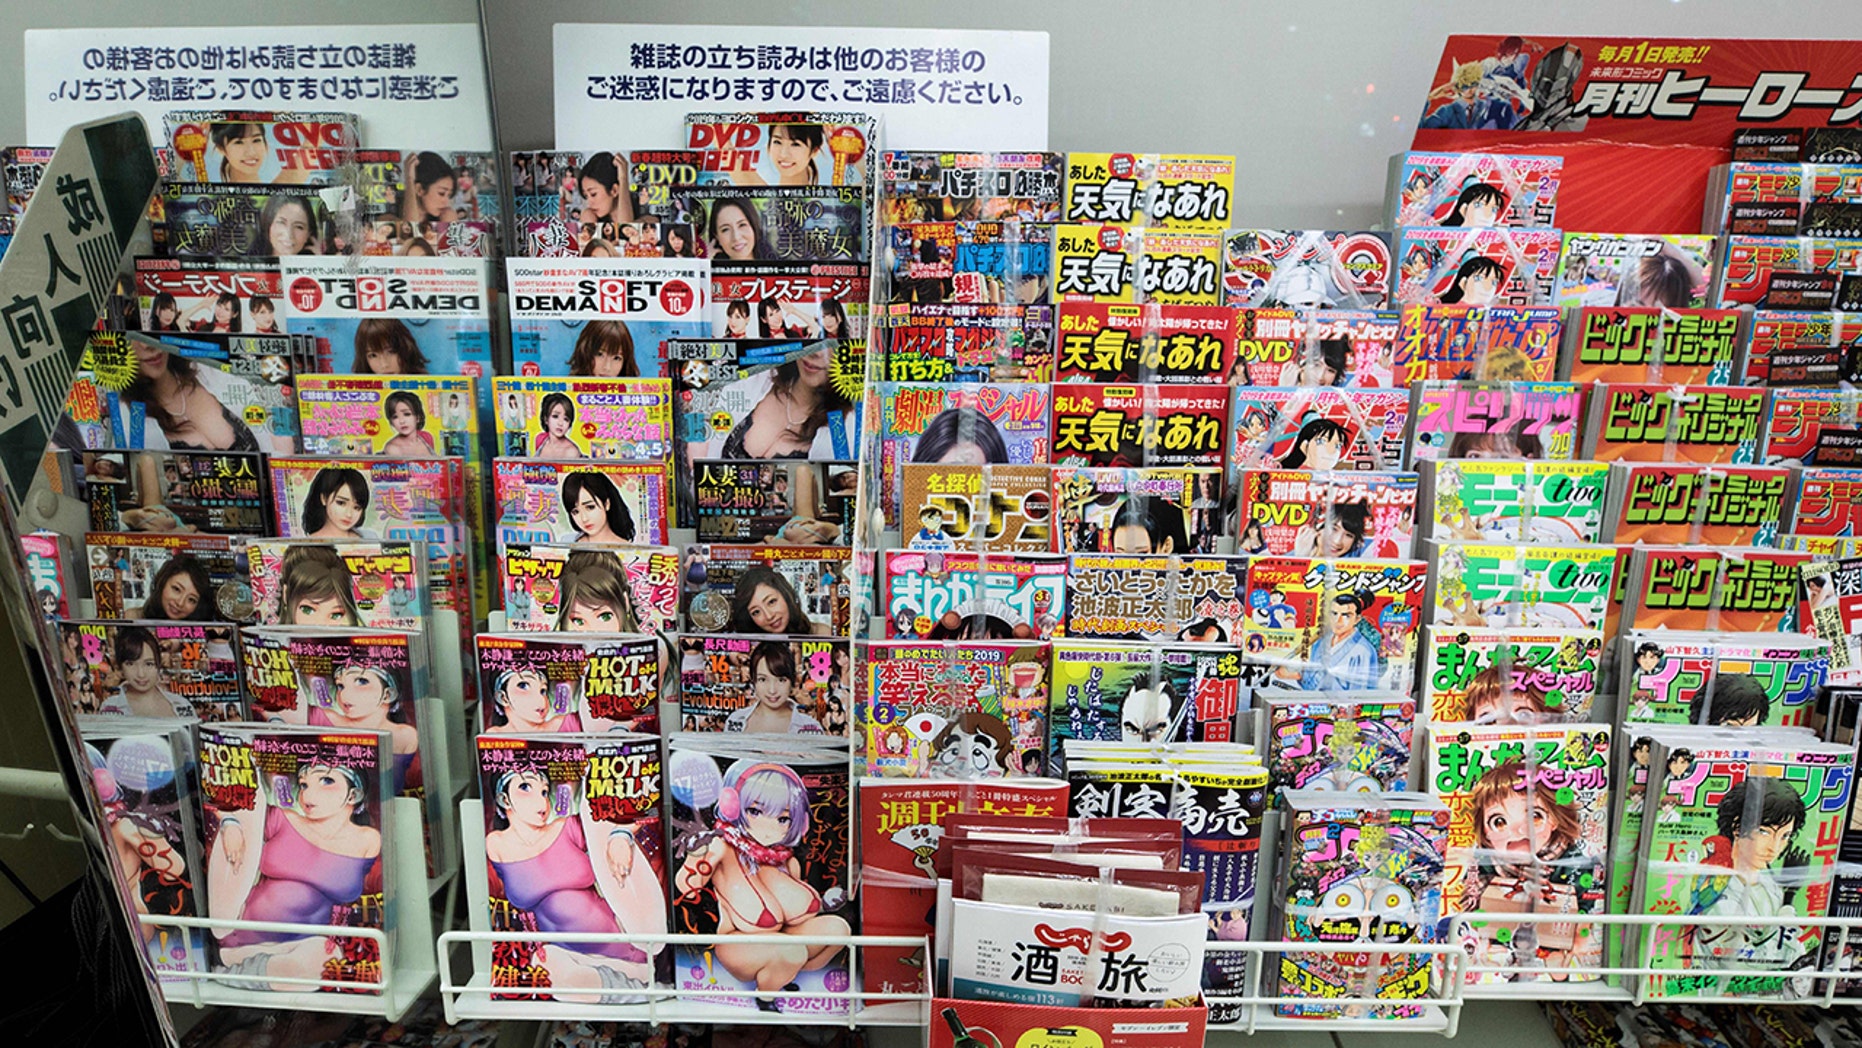 Porn magazines to be scrapped from most Japanese convenience stores before 2020 Olympics, Rugby World Cup